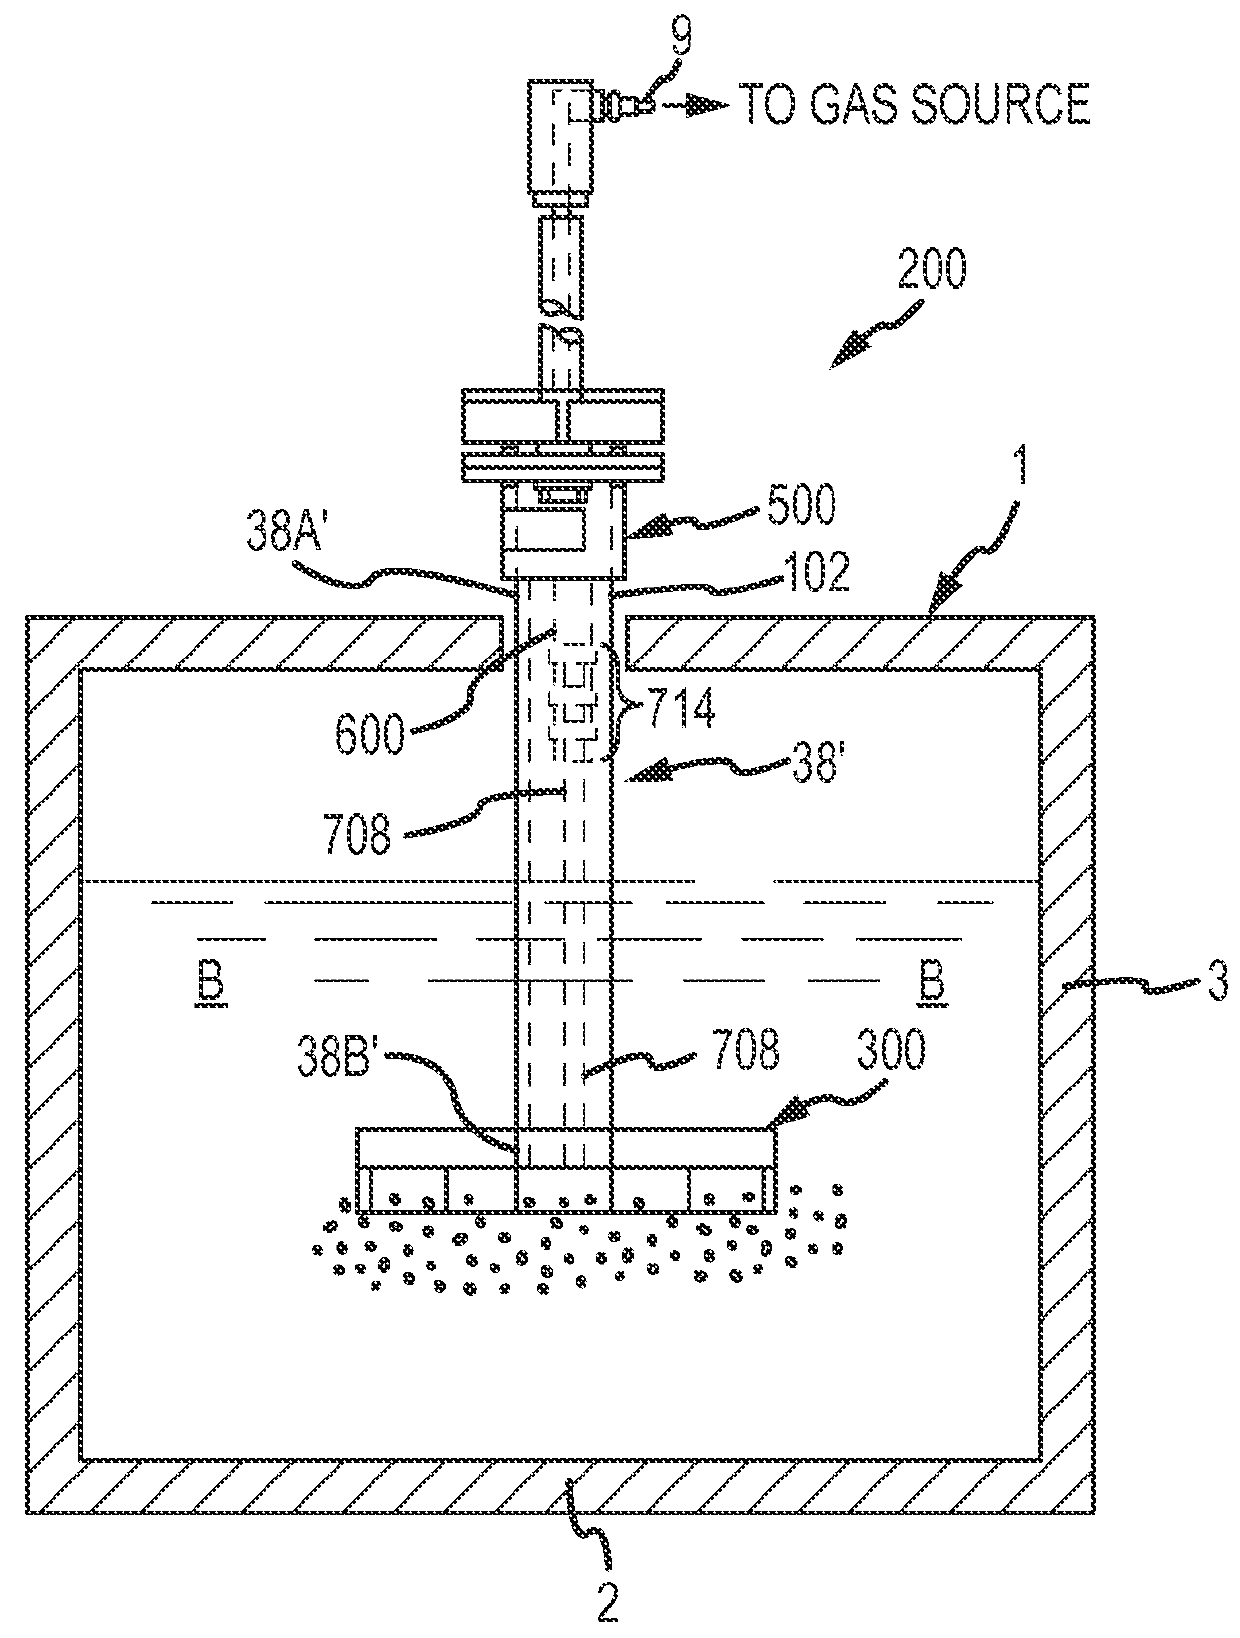 Coupling and rotor shaft for molten metal devices